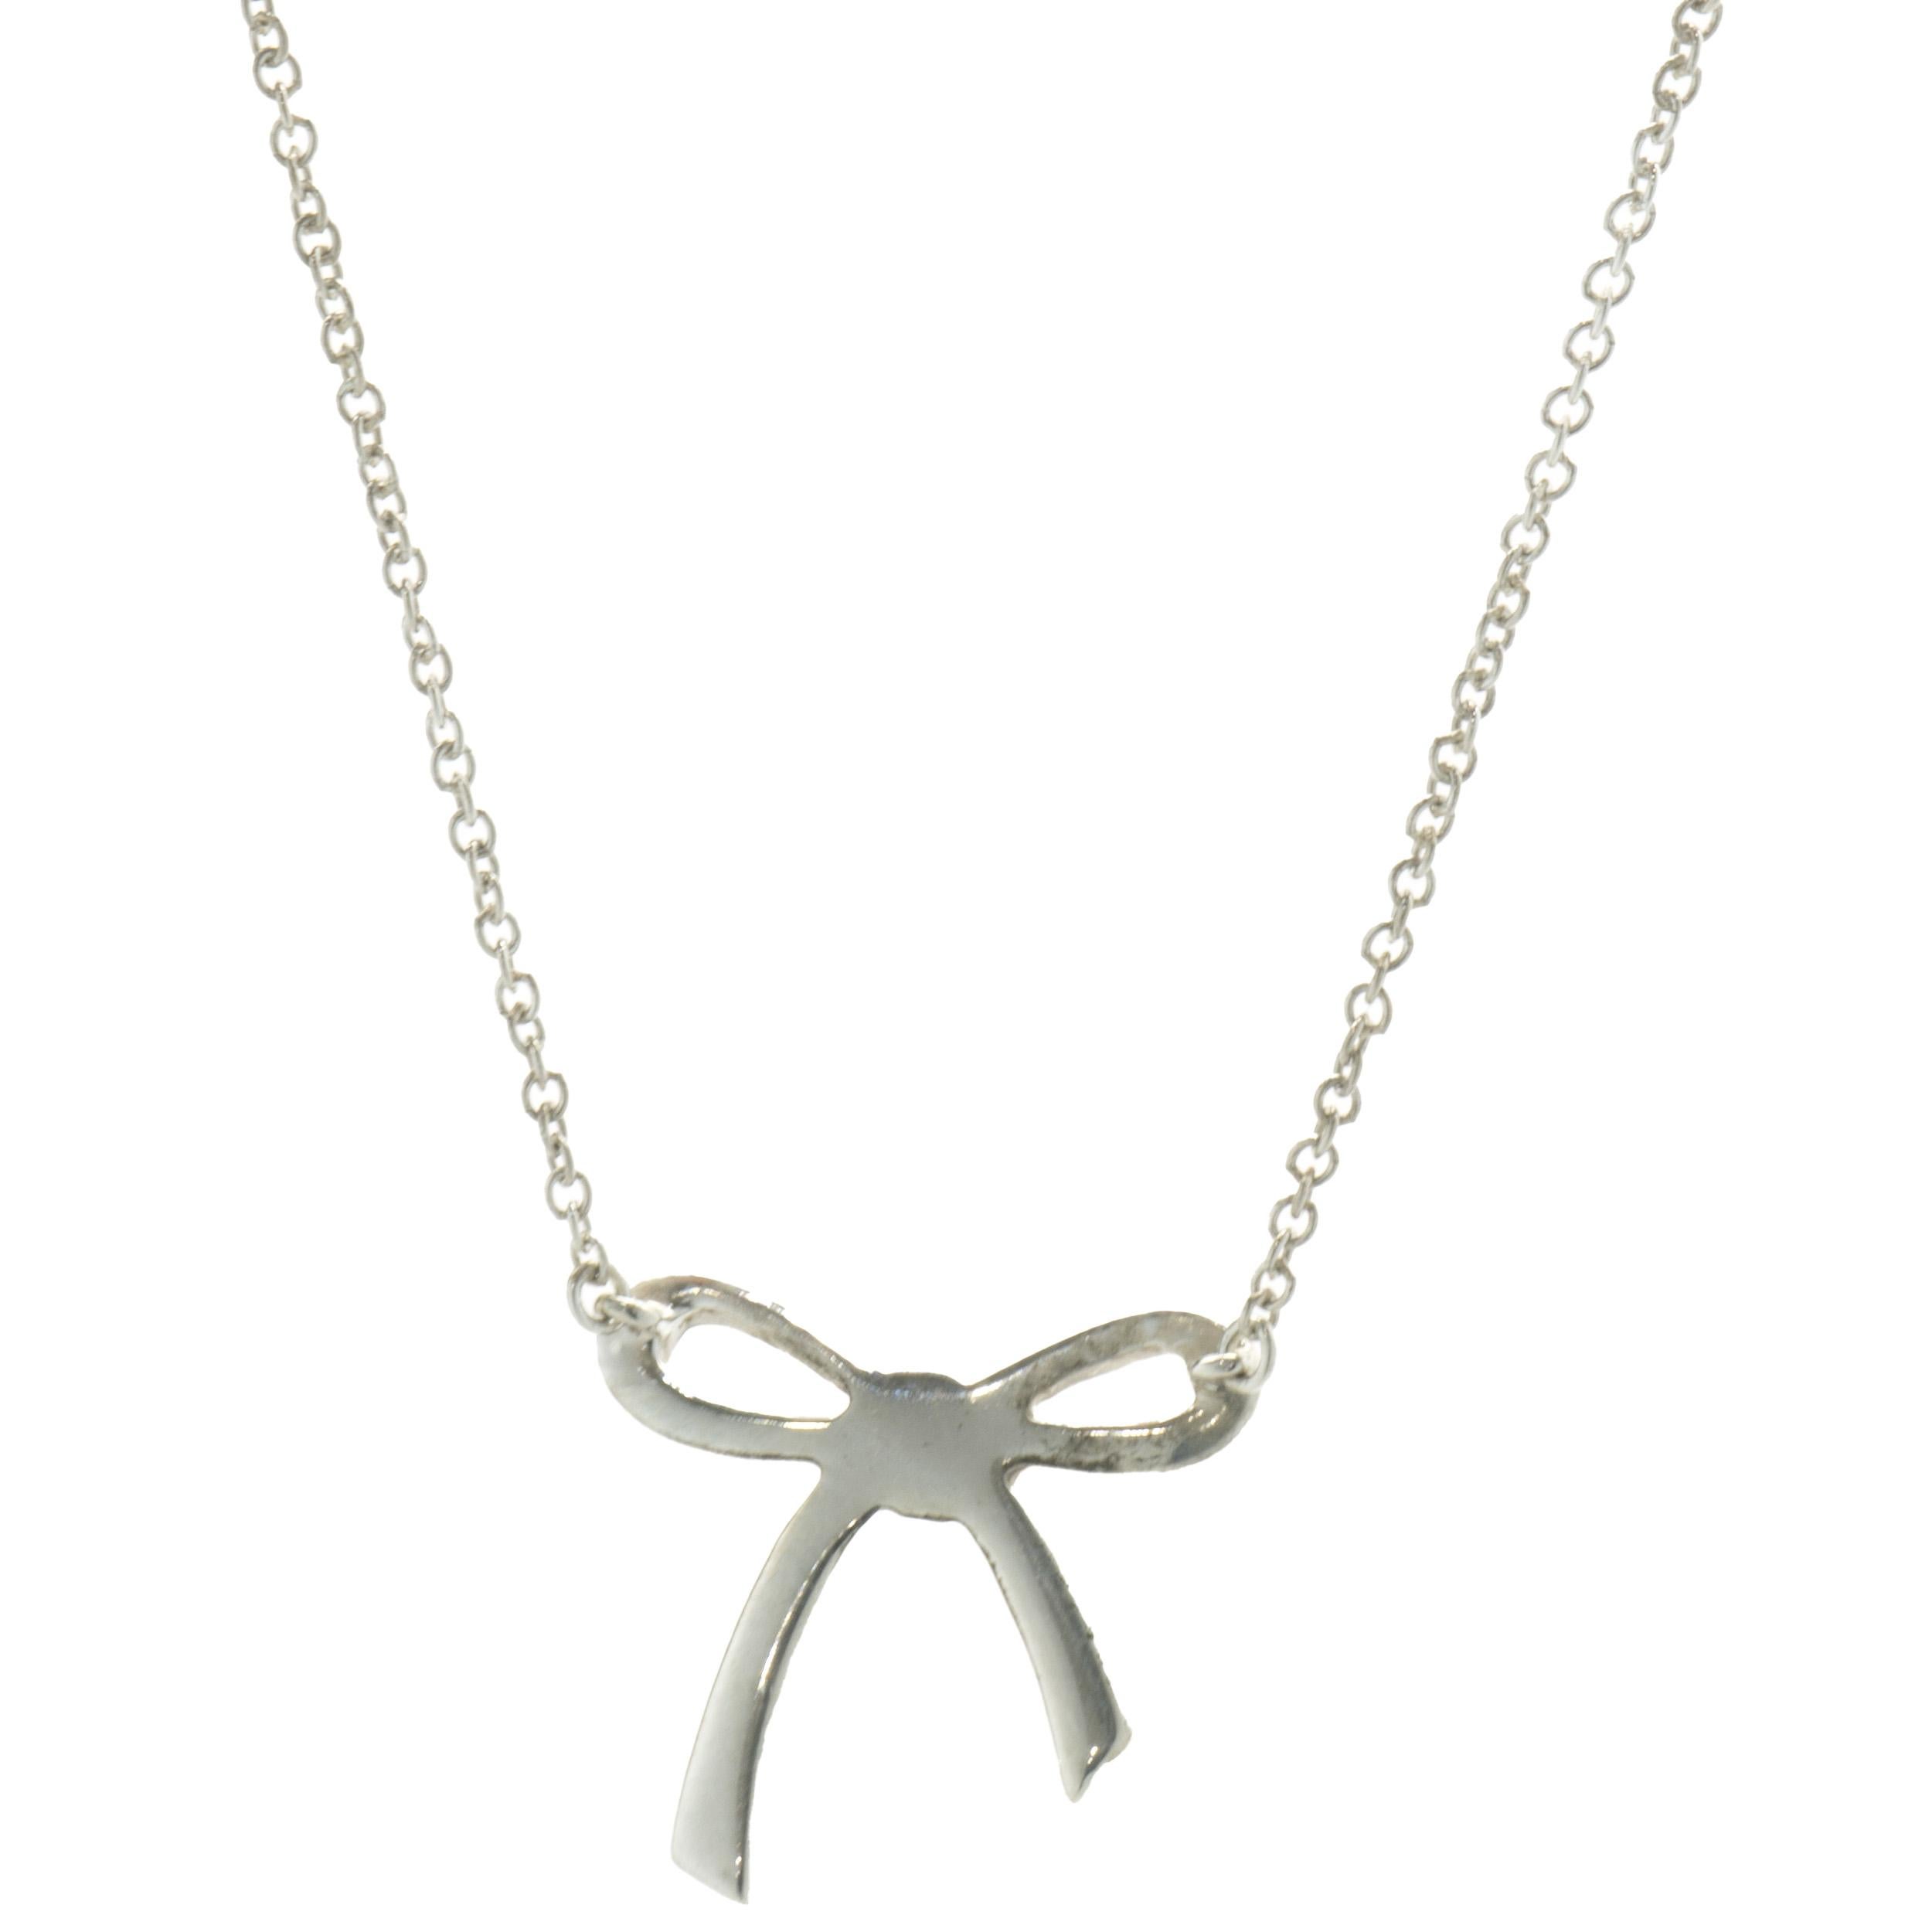 Designer: Tiffany & Co. 
Material: sterling silver
Dimensions: necklace measures 15-inches
Weight: 1.87 grams